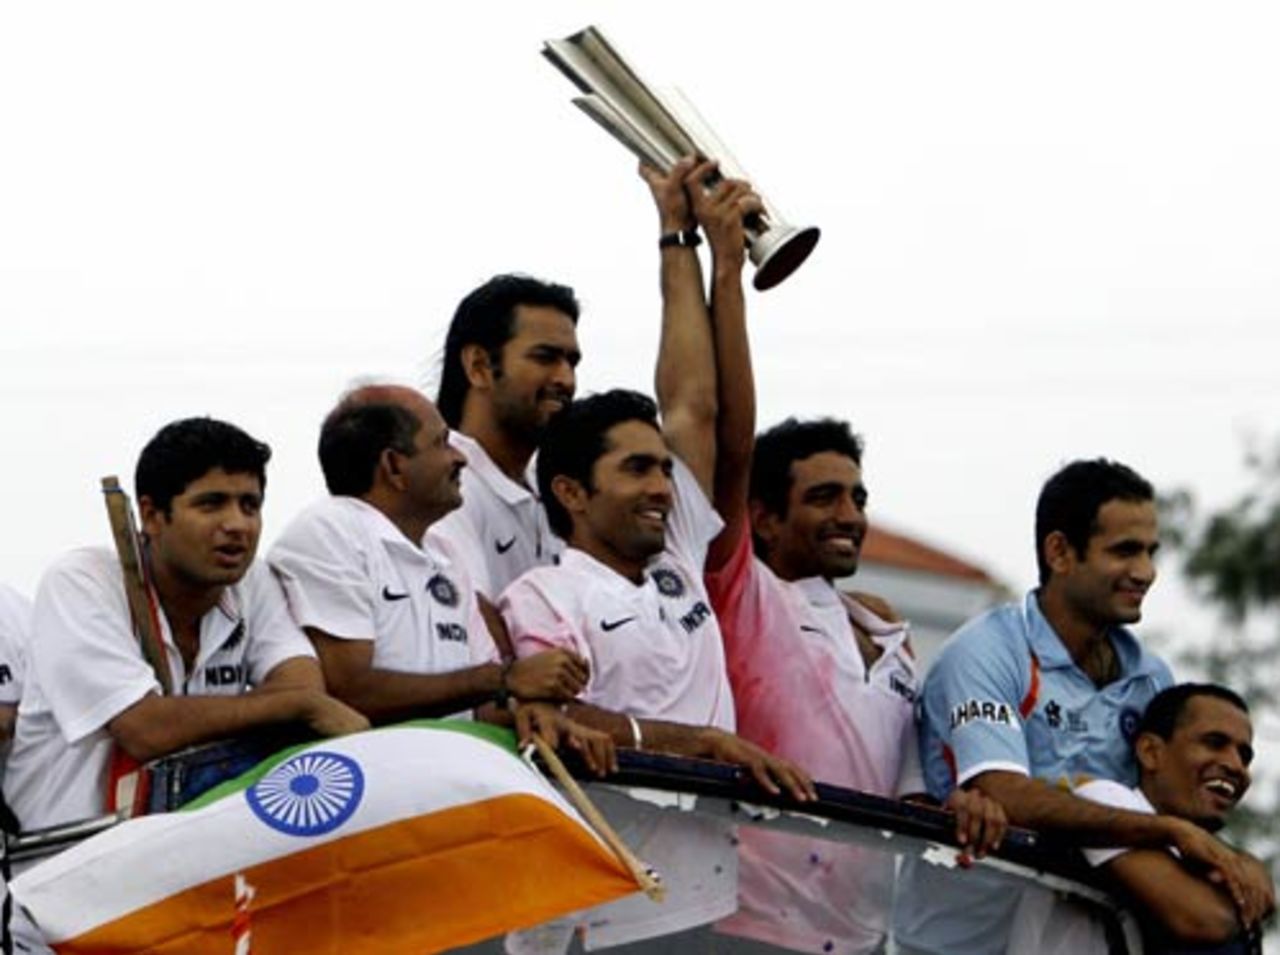 Indian players greet crowds in the streets of Mumbai from atop an open-topped bus, Mumbai, September 26, 2007